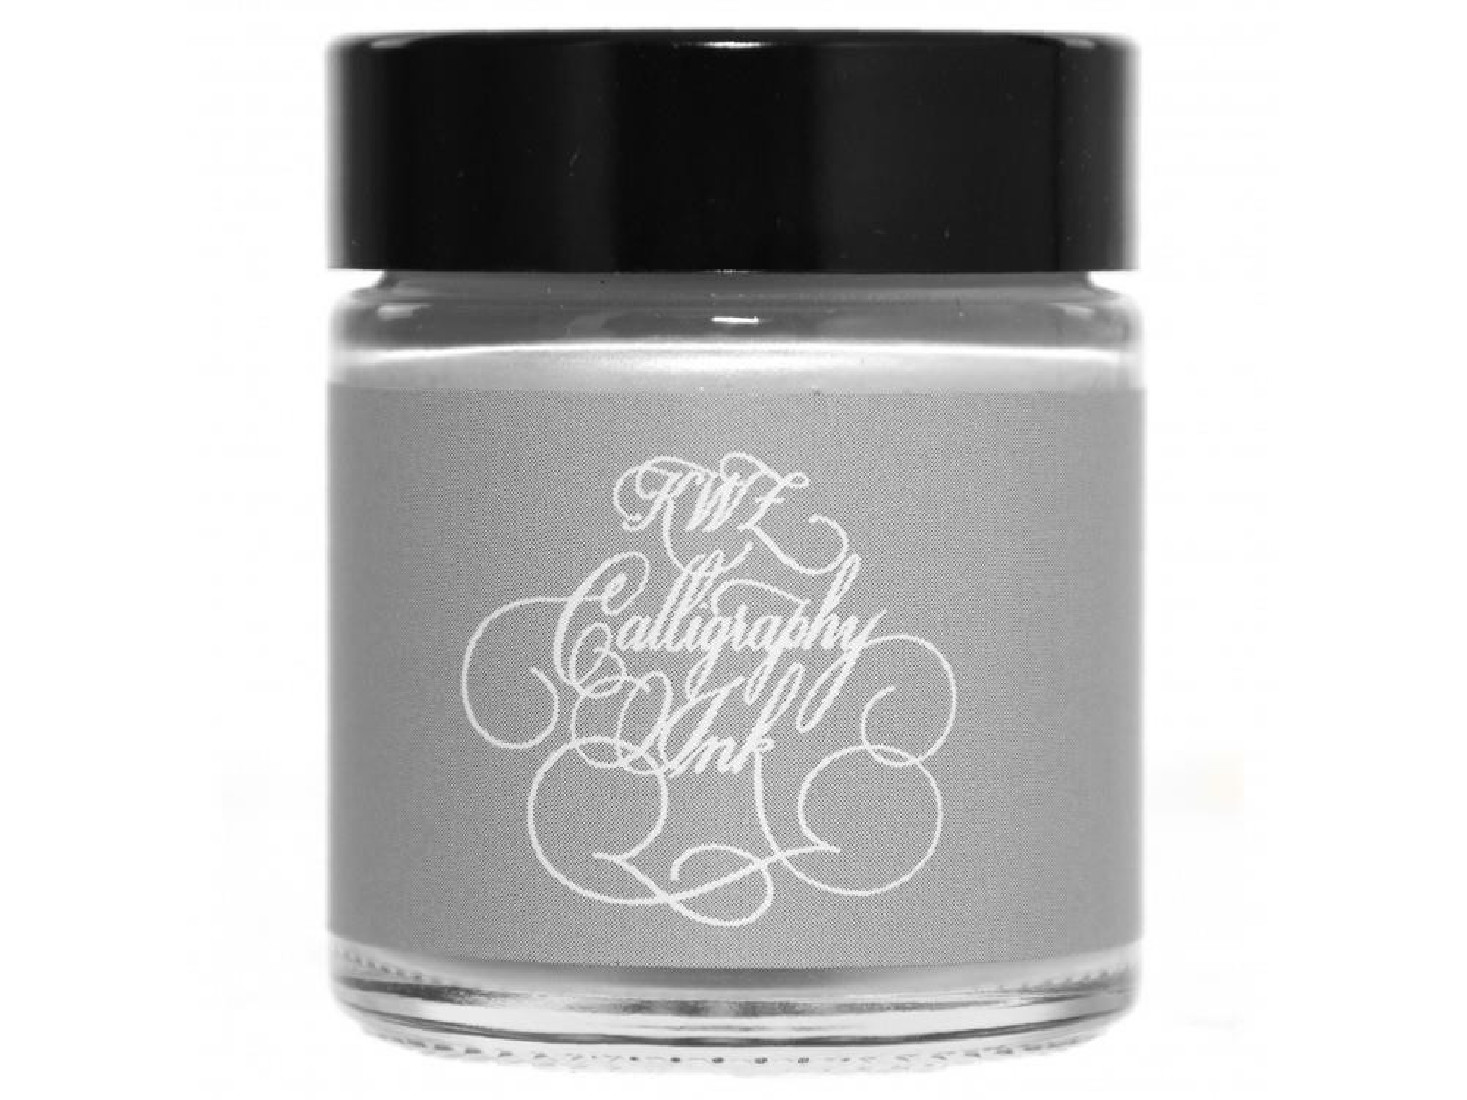 KWZ Calligraphy ink 5802 25g Pearl White for dip pens